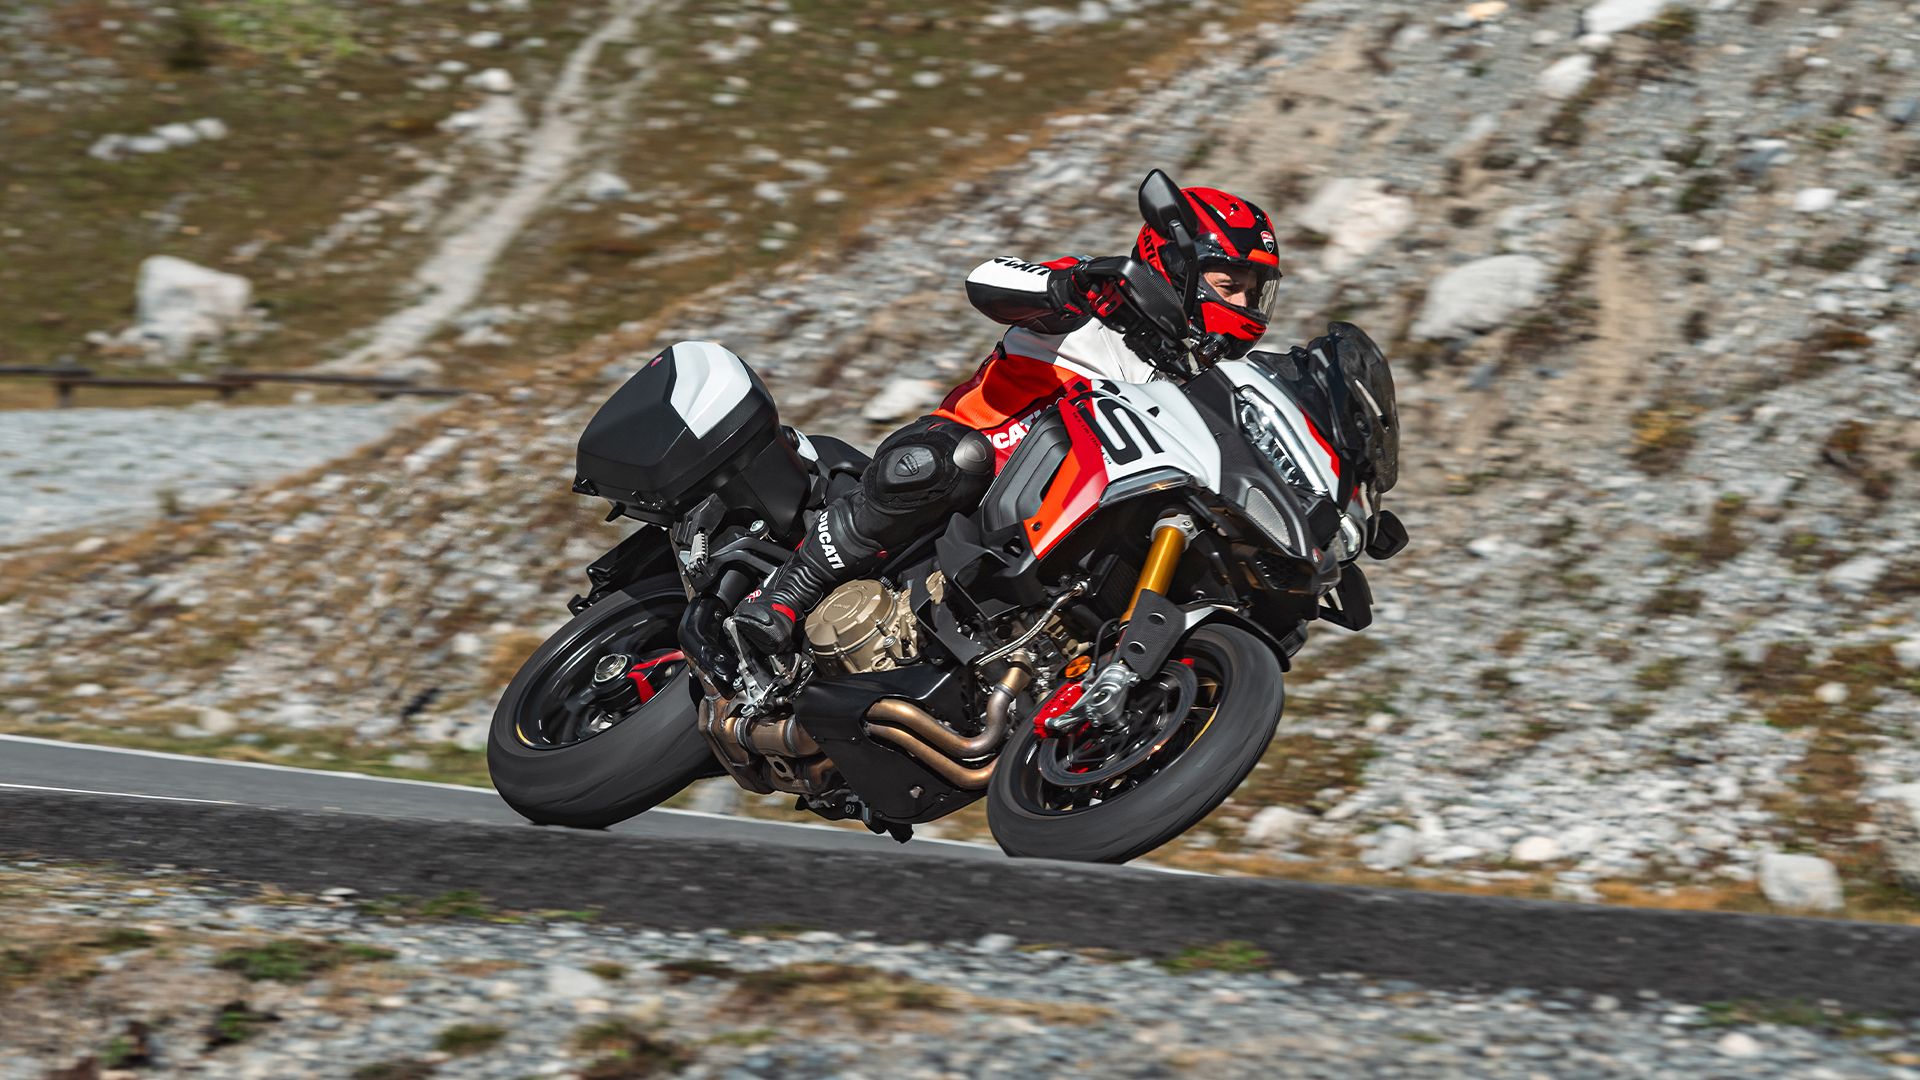 Meet The New Multistrada V4 RS Ducati’s Most Powerful ADV Yet